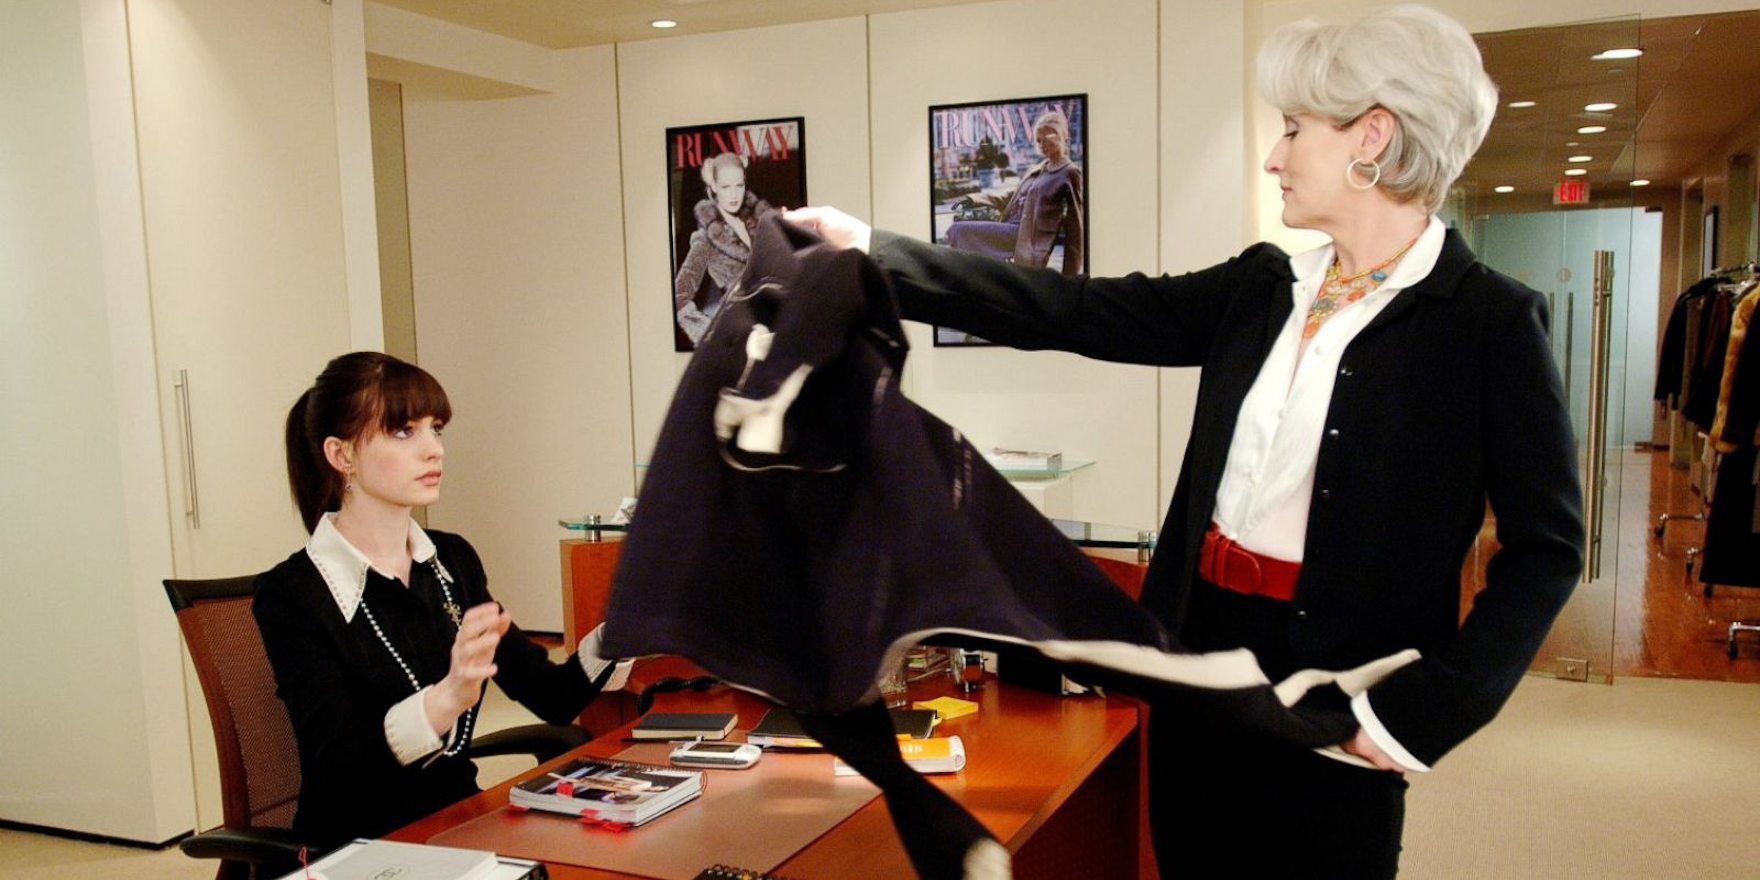 666 Lessons I Learned from The Devil Wears Prada